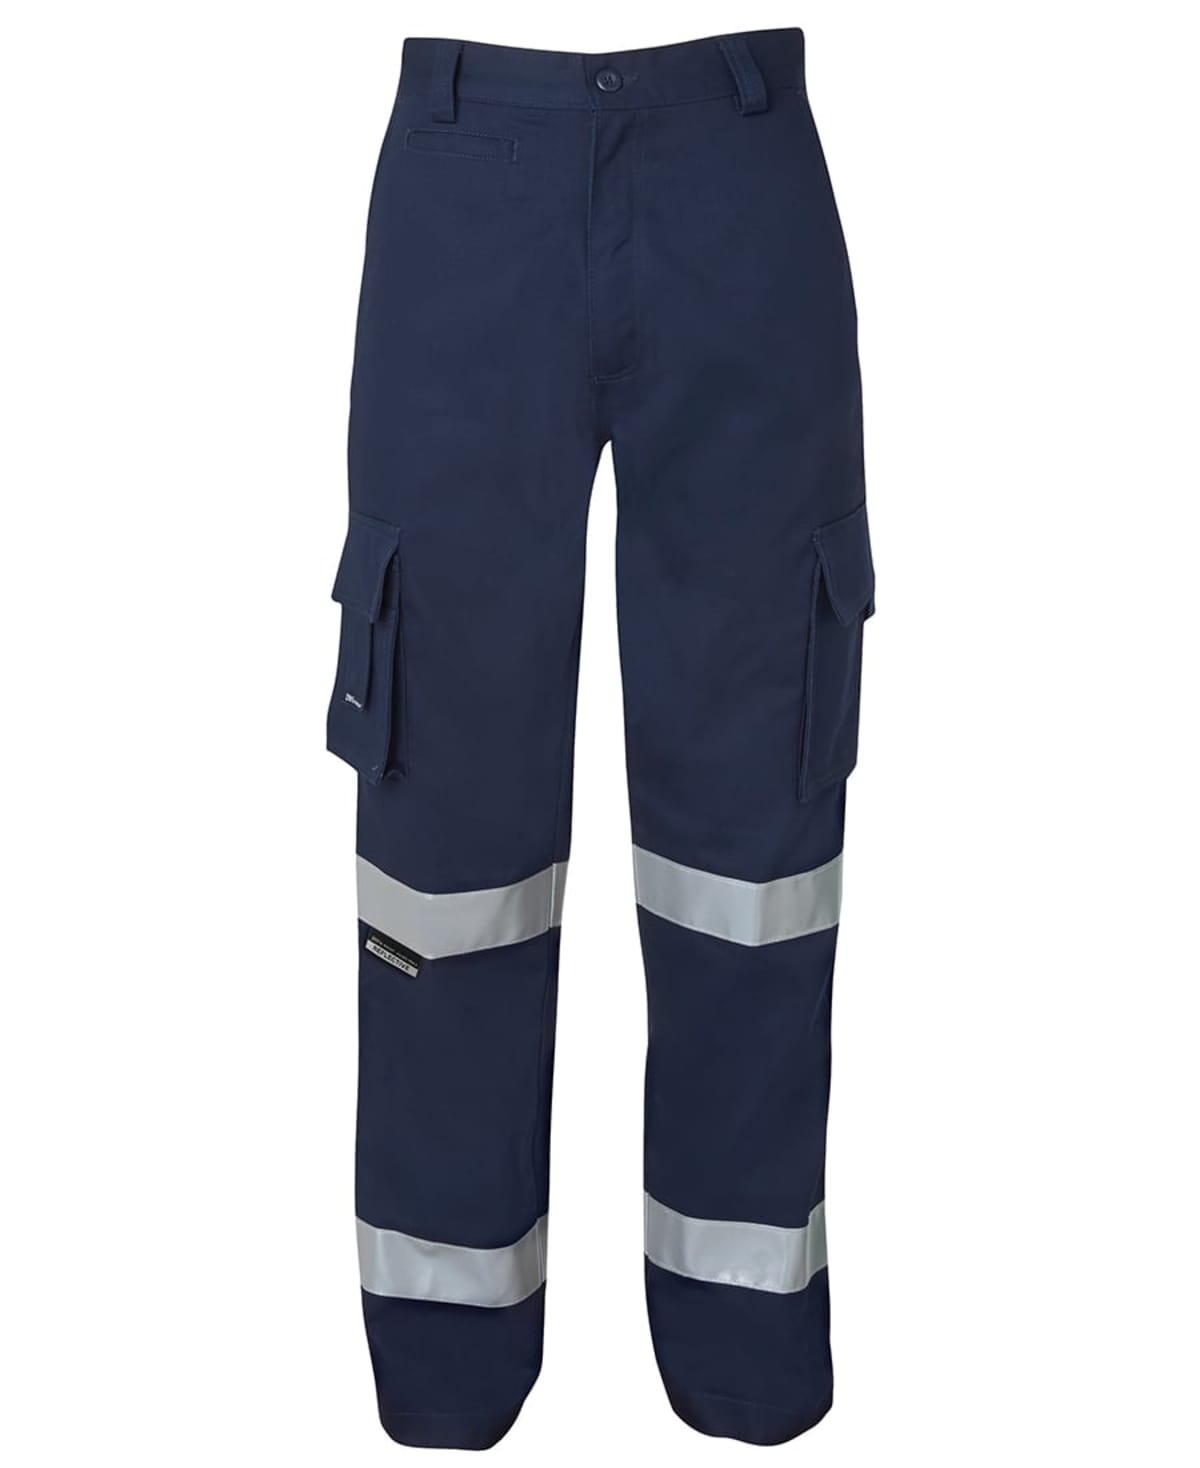 JB's Bio-Motion Lightweight Pant with Reflective Tape